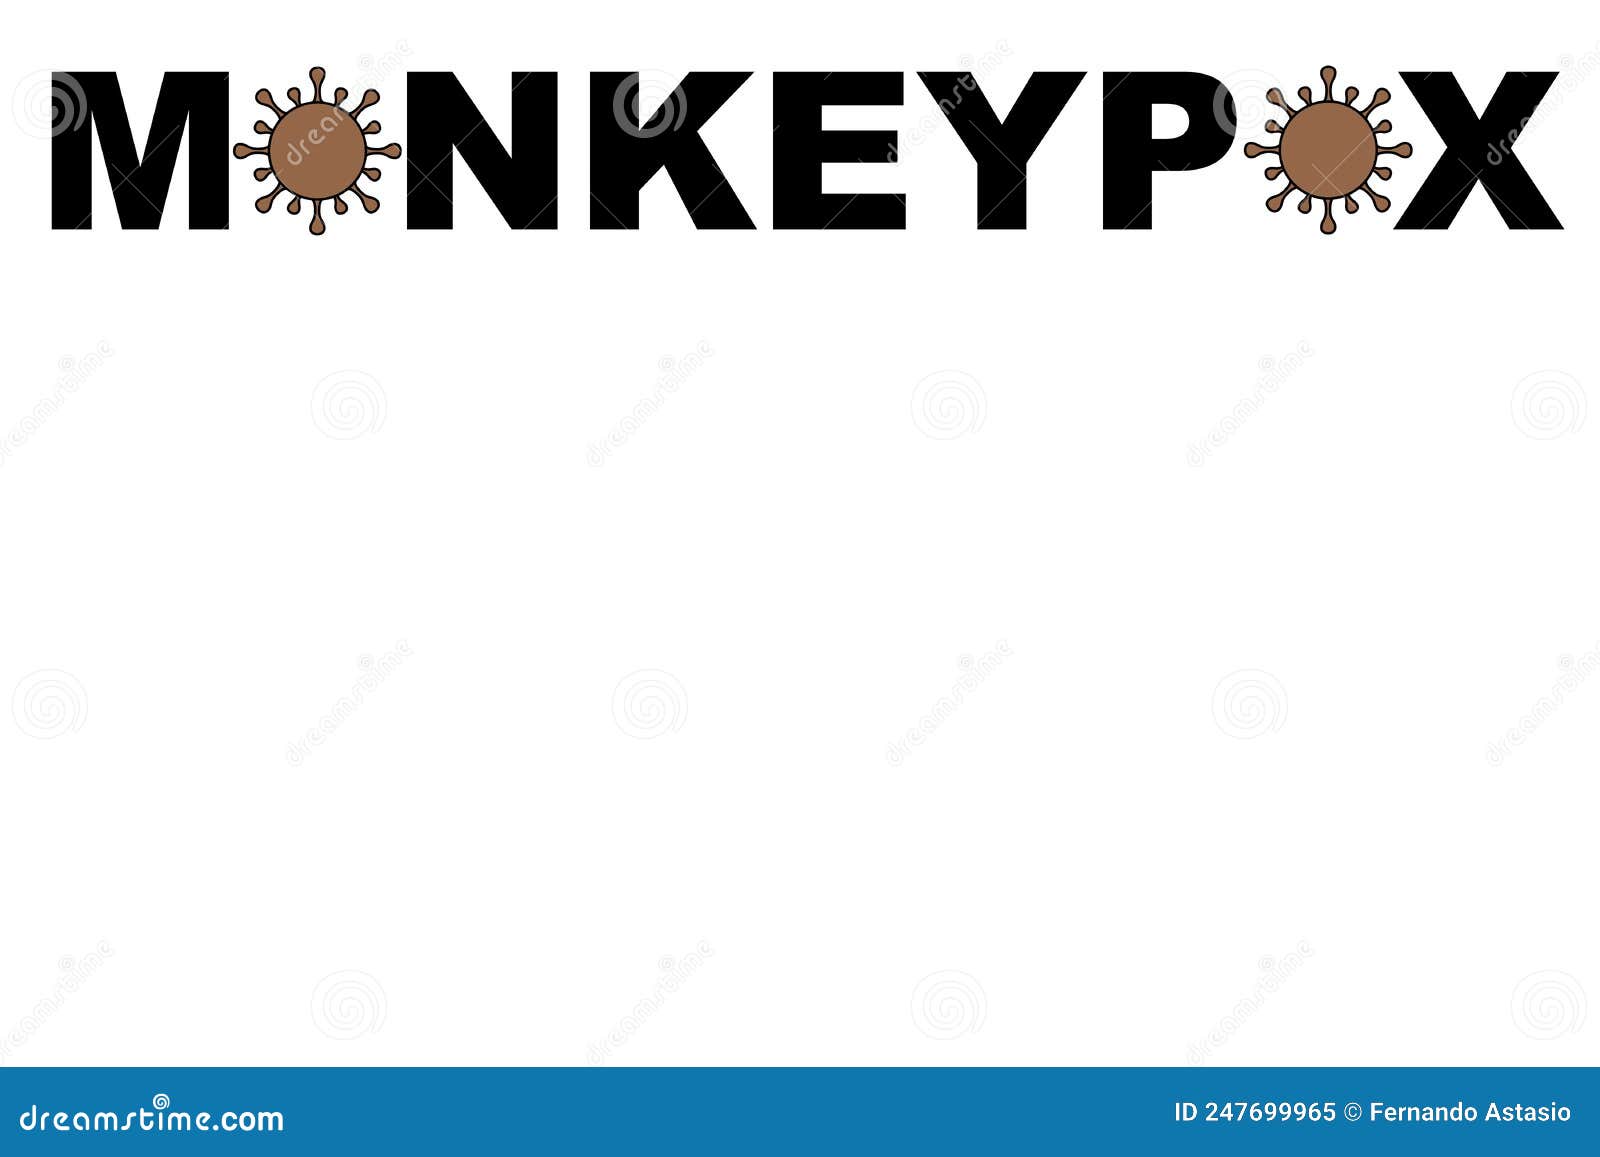 monkeypox virus. monkeypox is a zoonotic viral disease that can infect nonhuman primates, rodents, and some other mammals.